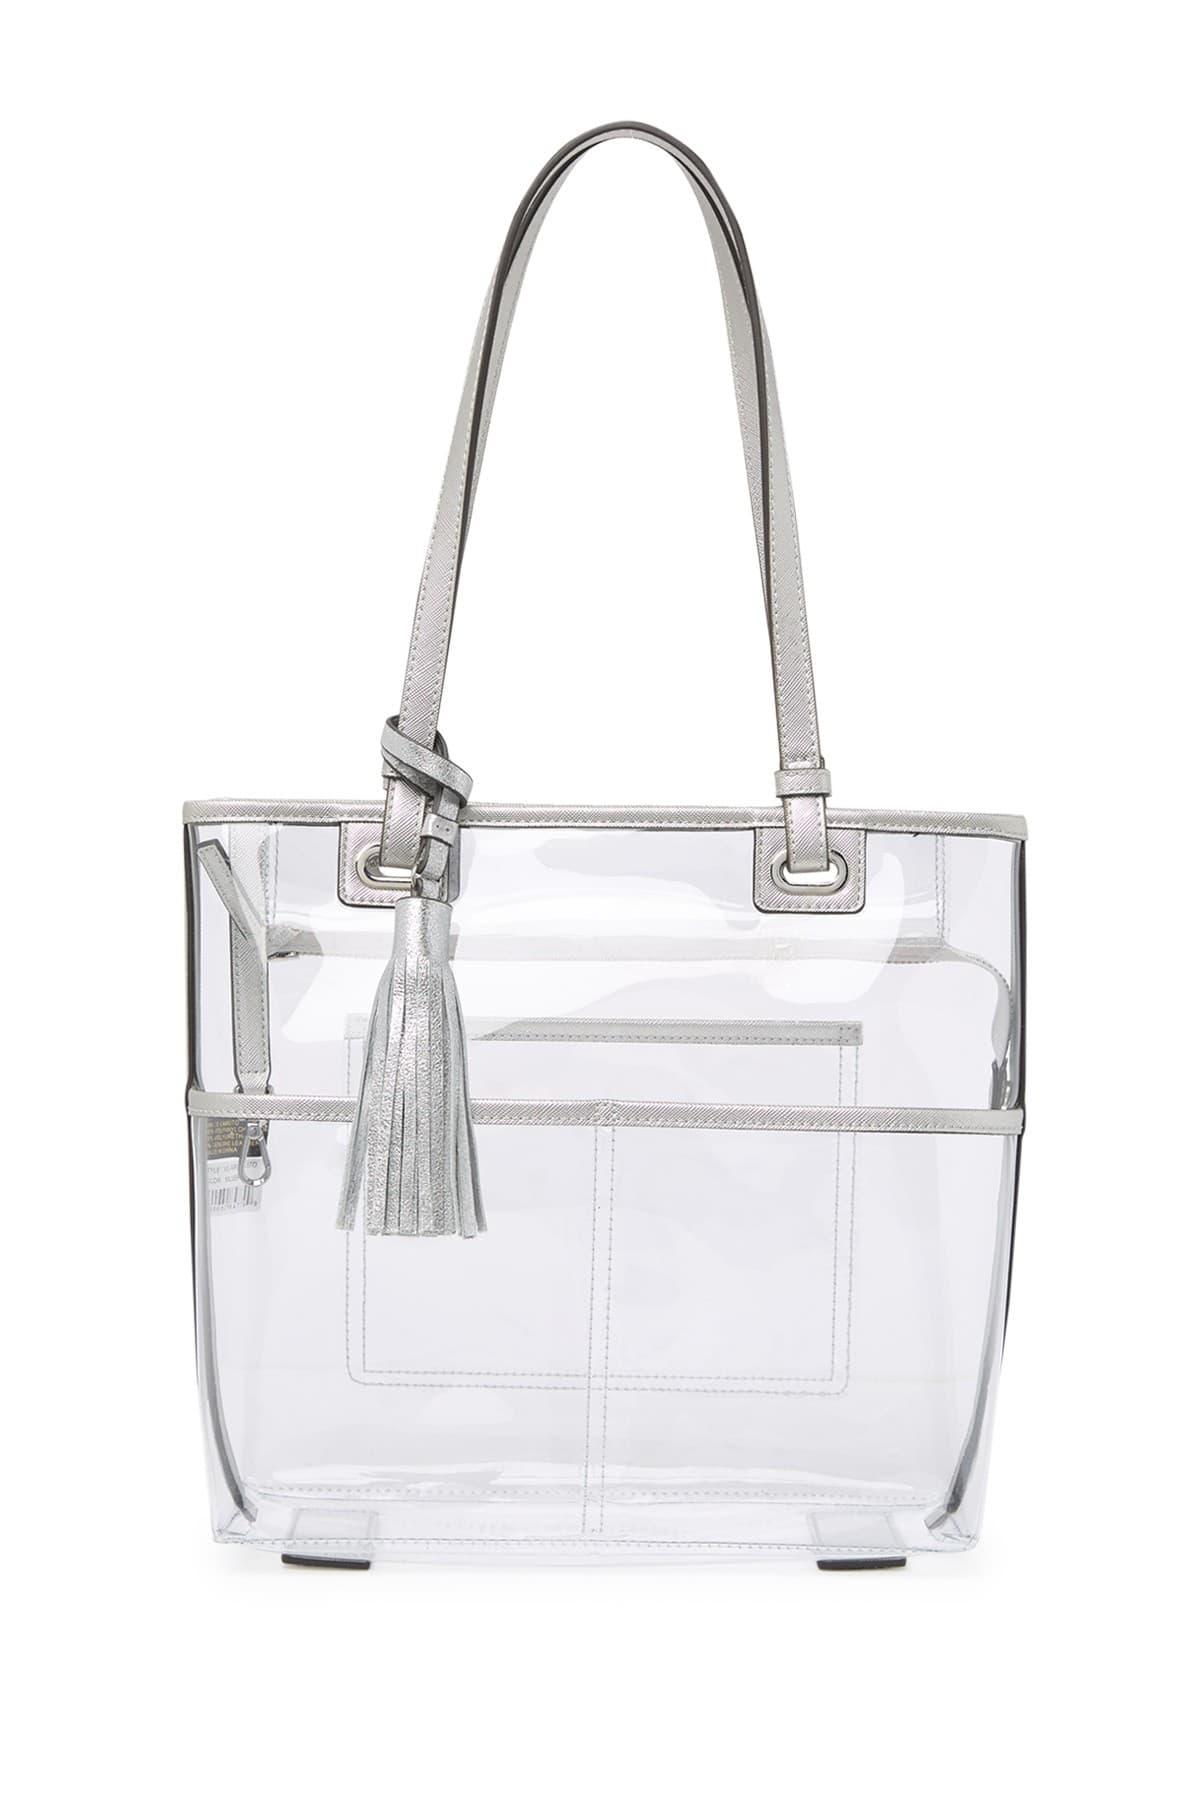 Vince Camuto Aryna Clear Small Colorblock Tote Bag in Metallic | Lyst